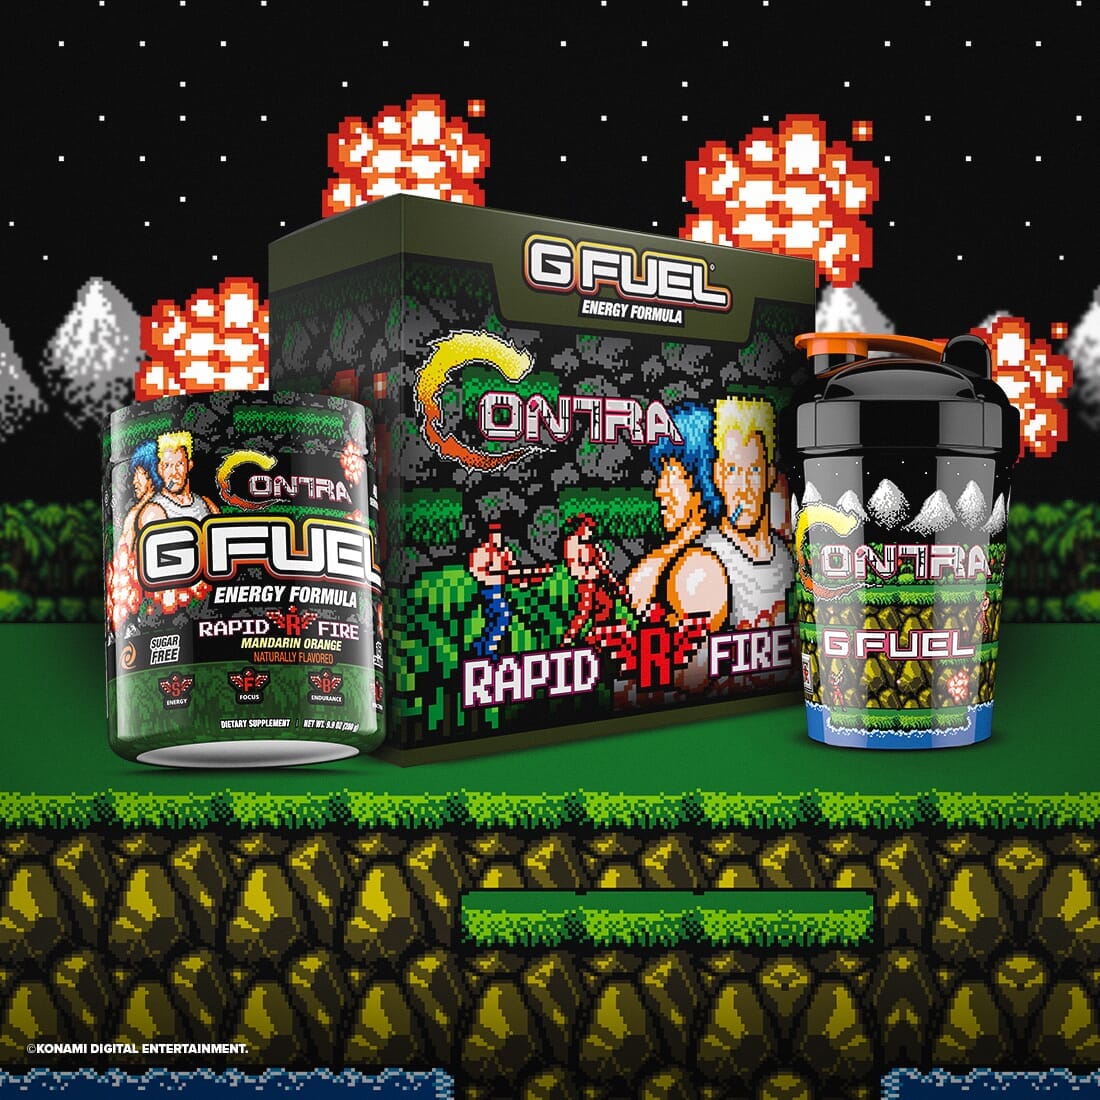 G FUEL Rapid Fire inspired by "CONTRA"